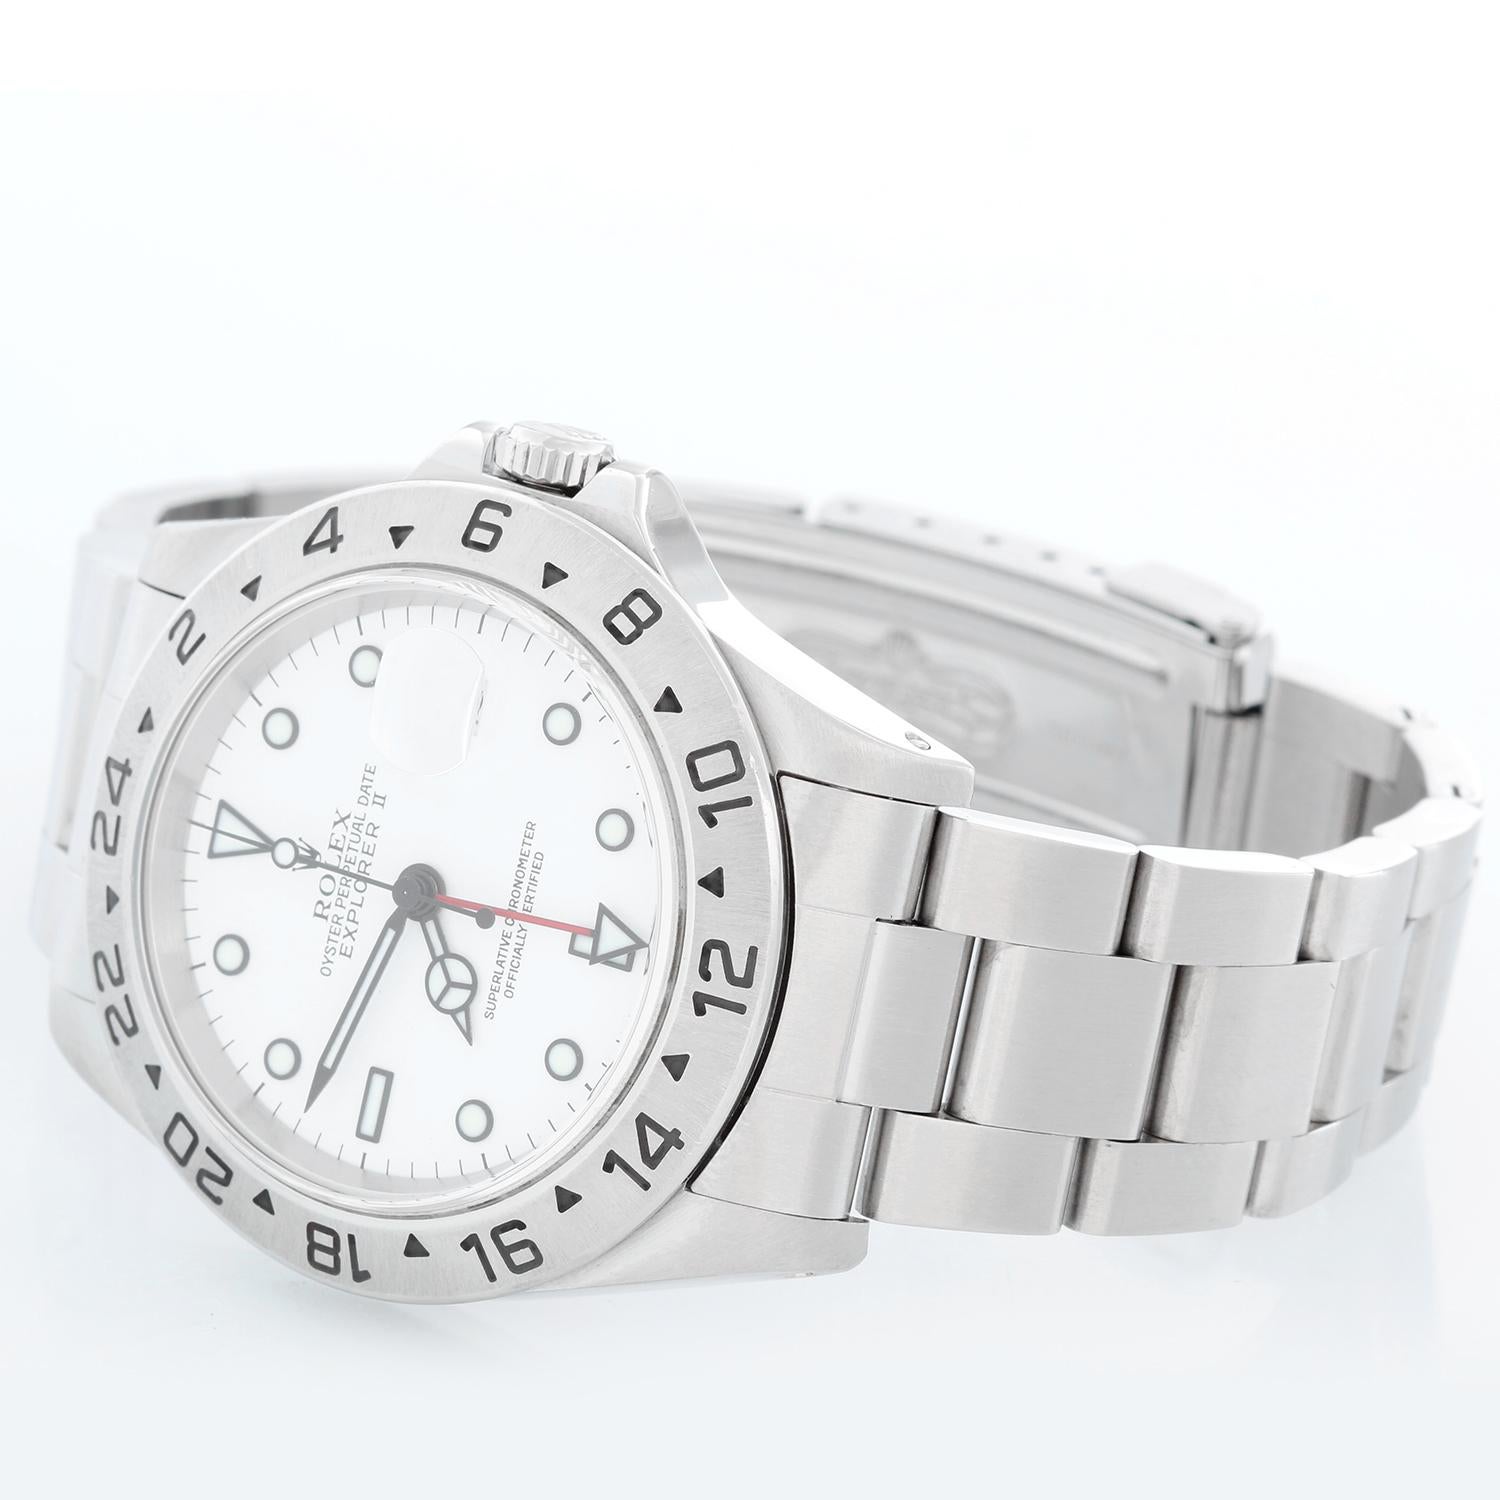 Rolex Explorer II Men's Stainless Steel Watch 16570 - Automatic winding, 31 jewels, Quickset, sapphire crystal, dual time. Stainless steel case (40mm diameter). White dial with luminous markers. Stainless steel Oyster bracelet. Pre-owned with box